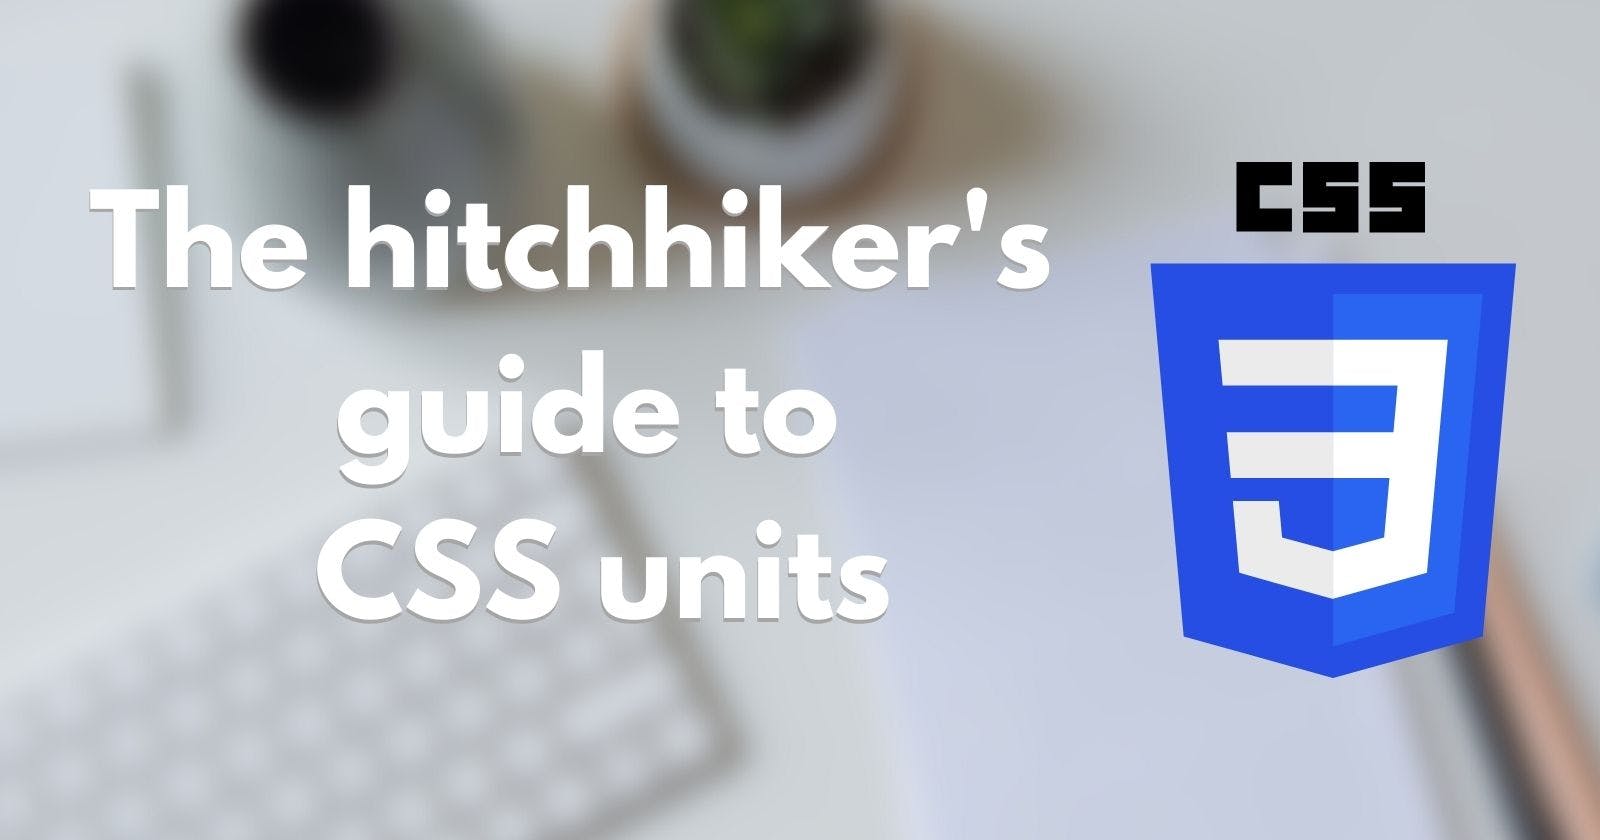 The hitchhiker's guide to CSS units